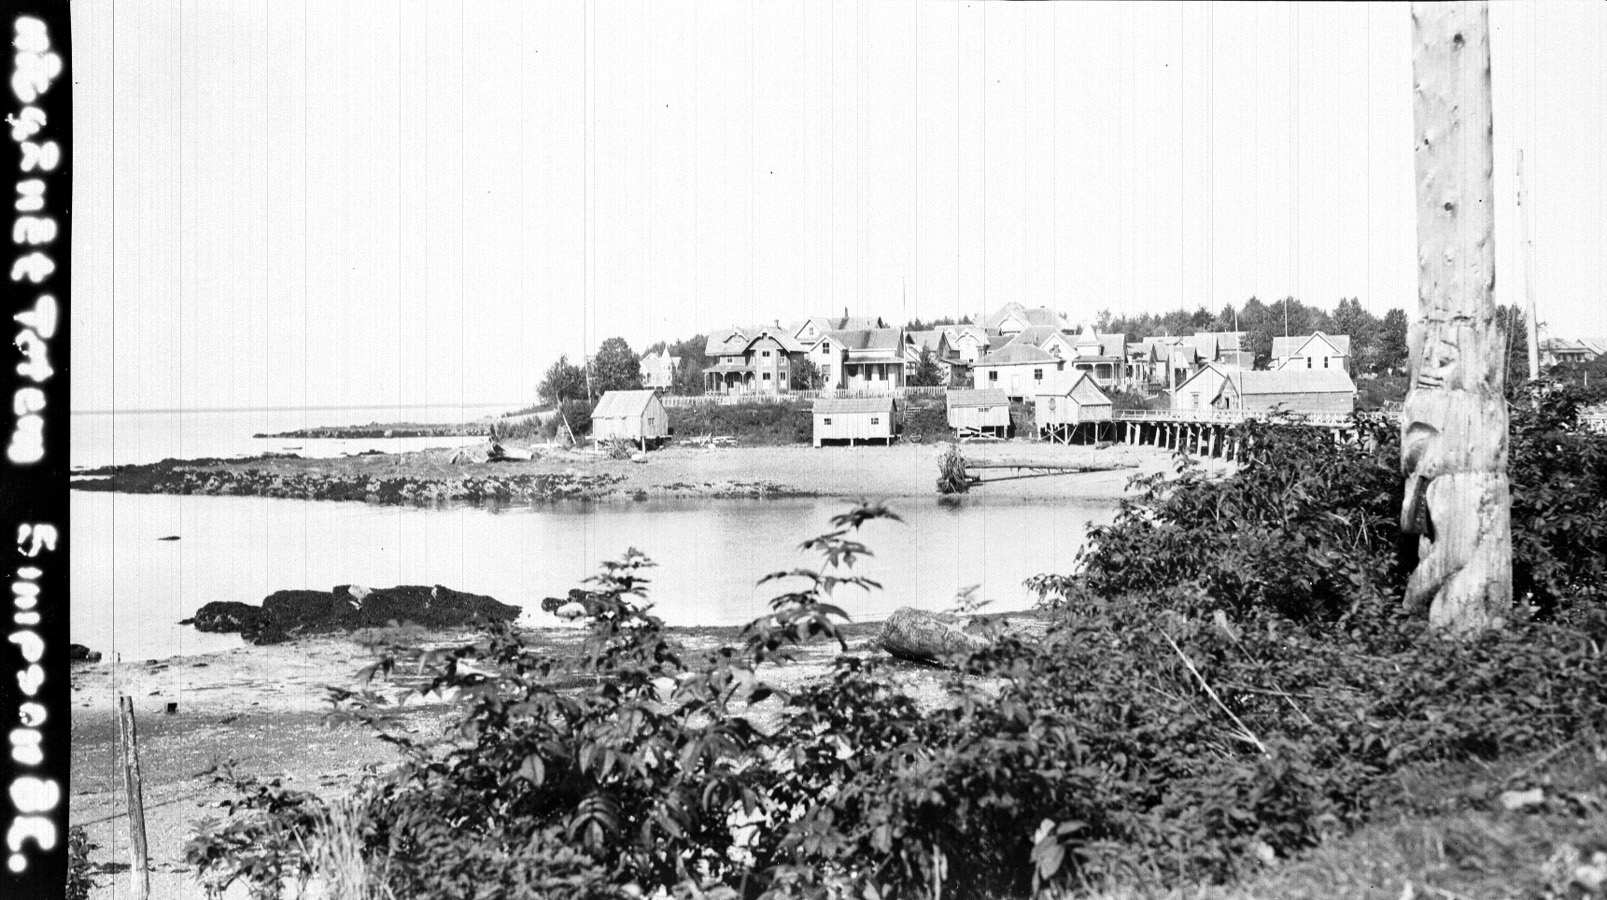 Port Simpson, B.C. Island section. Totem pole in foreground. Aug. 31, 1918